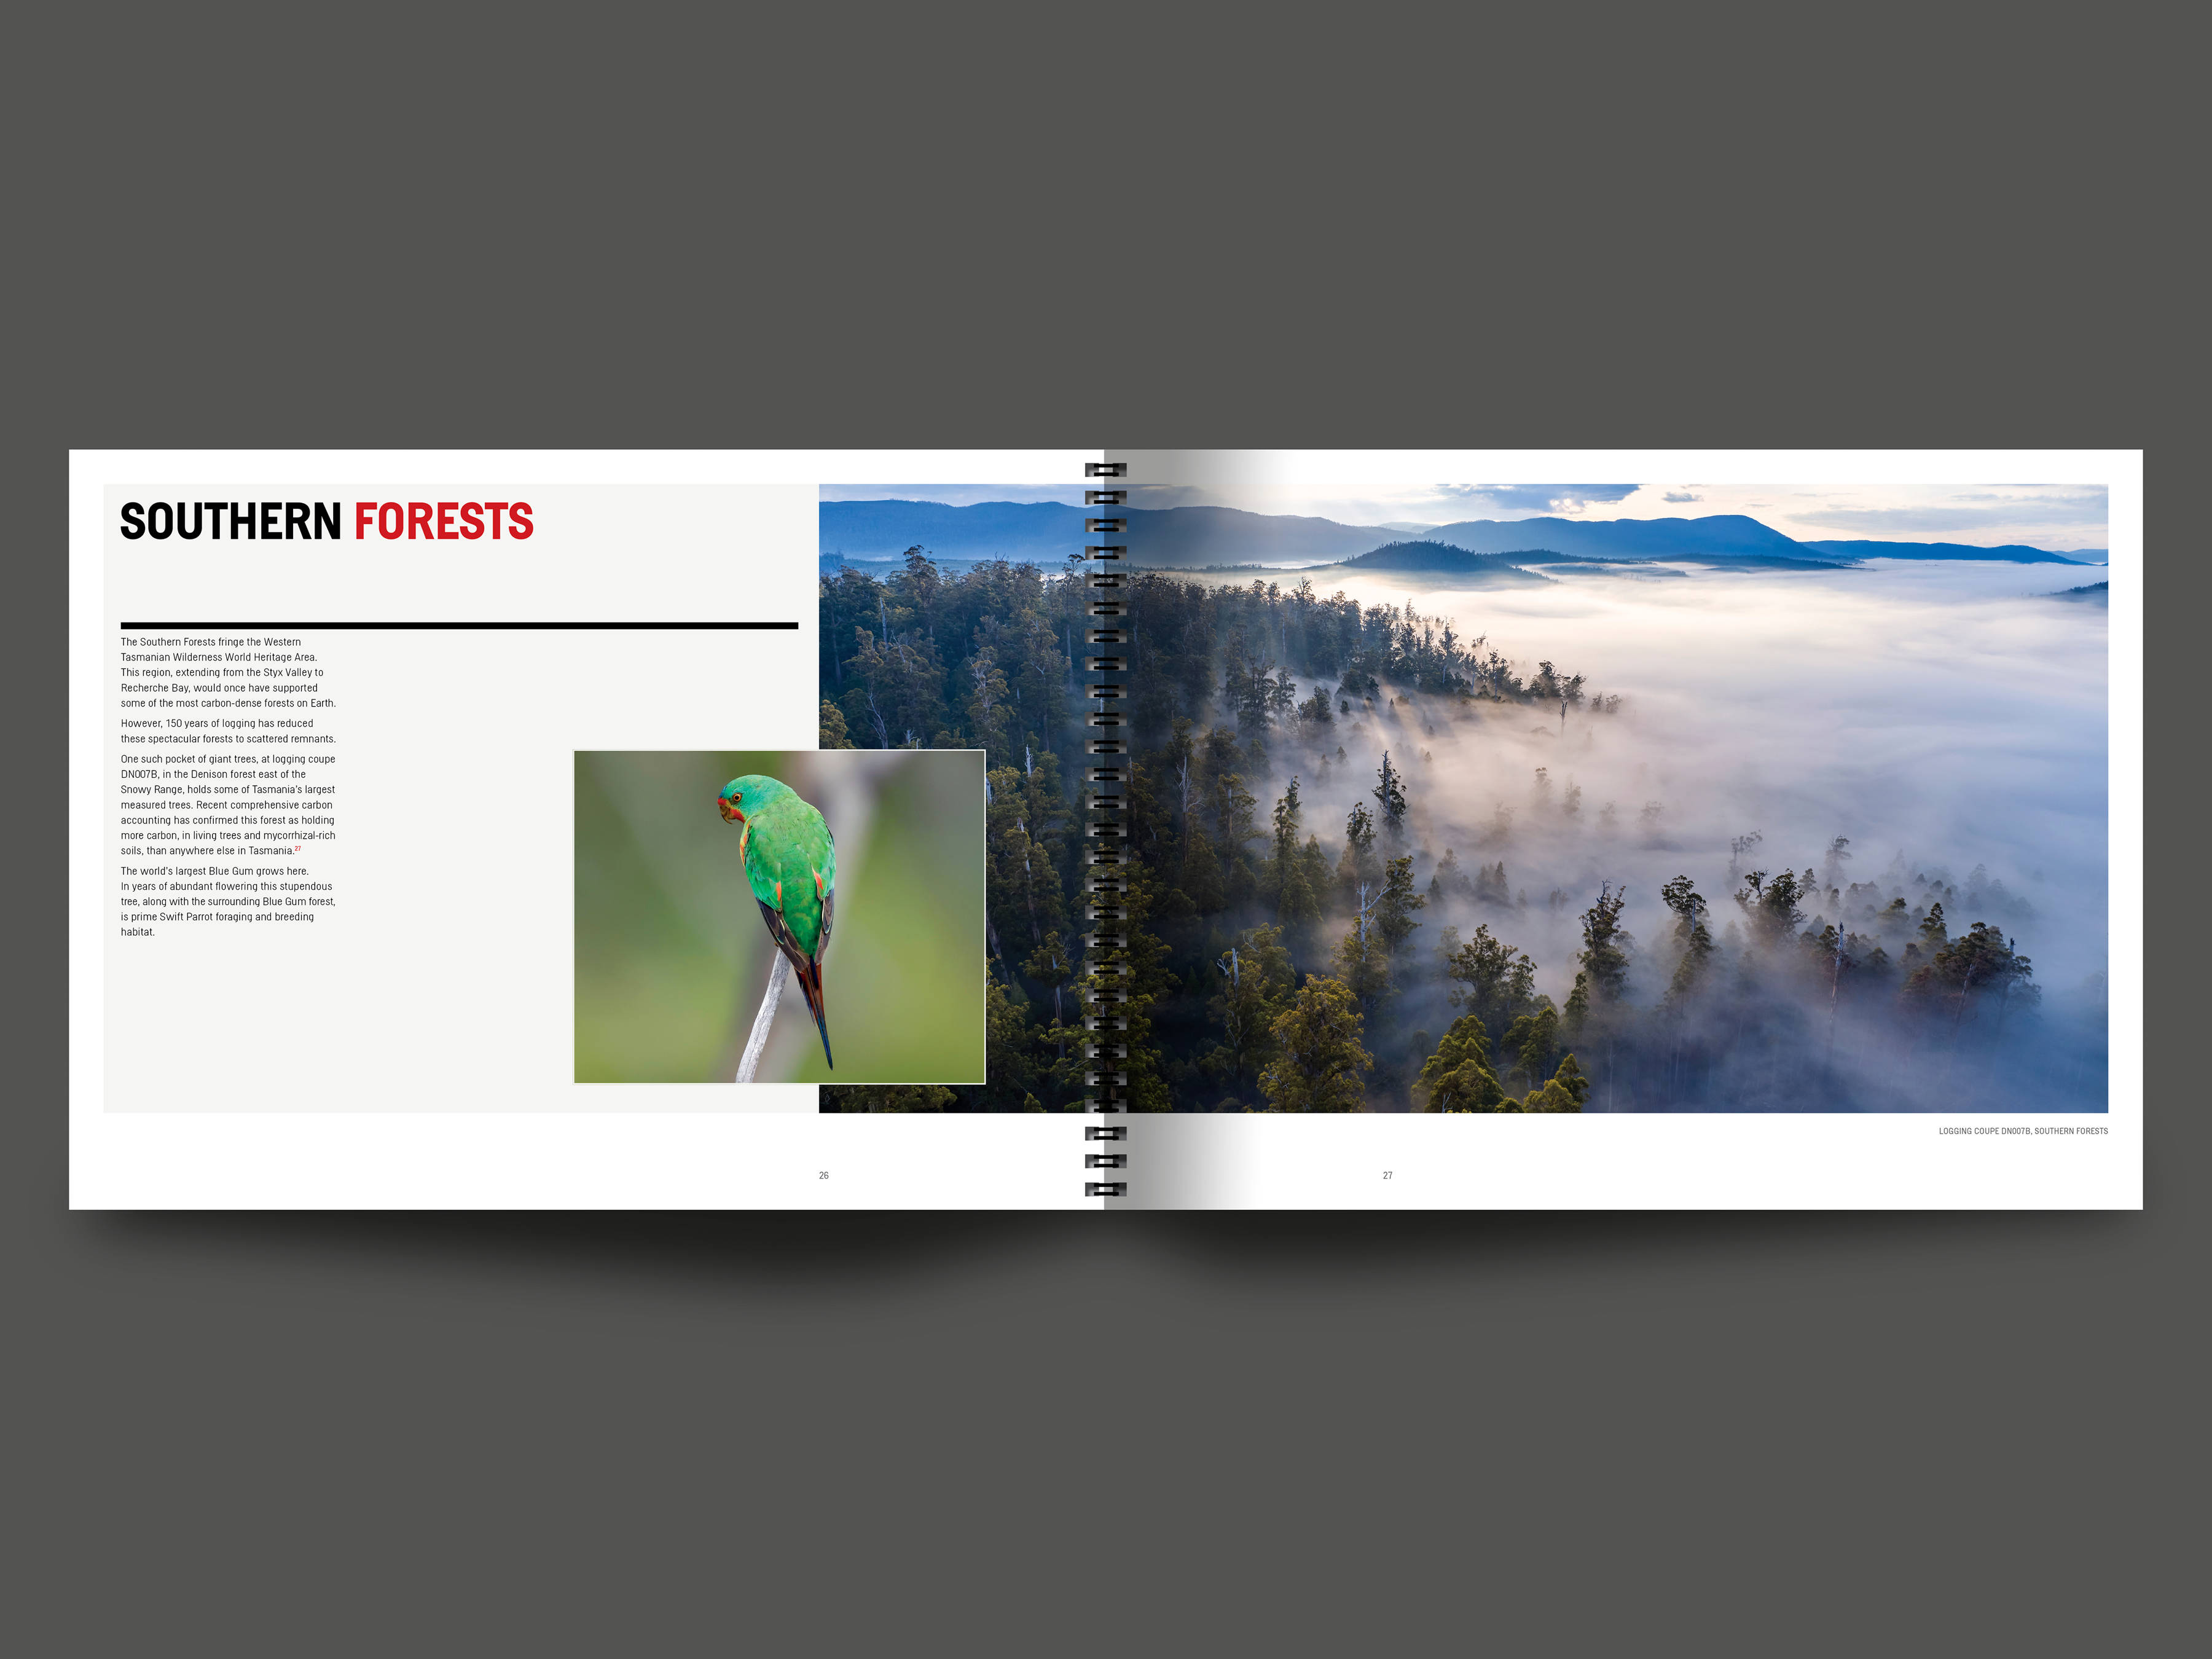 A double page spread from the book featuring text about the Southern Forests on the left and a full page image of the Southern Forest landscape on the right. Images by Rob Blakers.